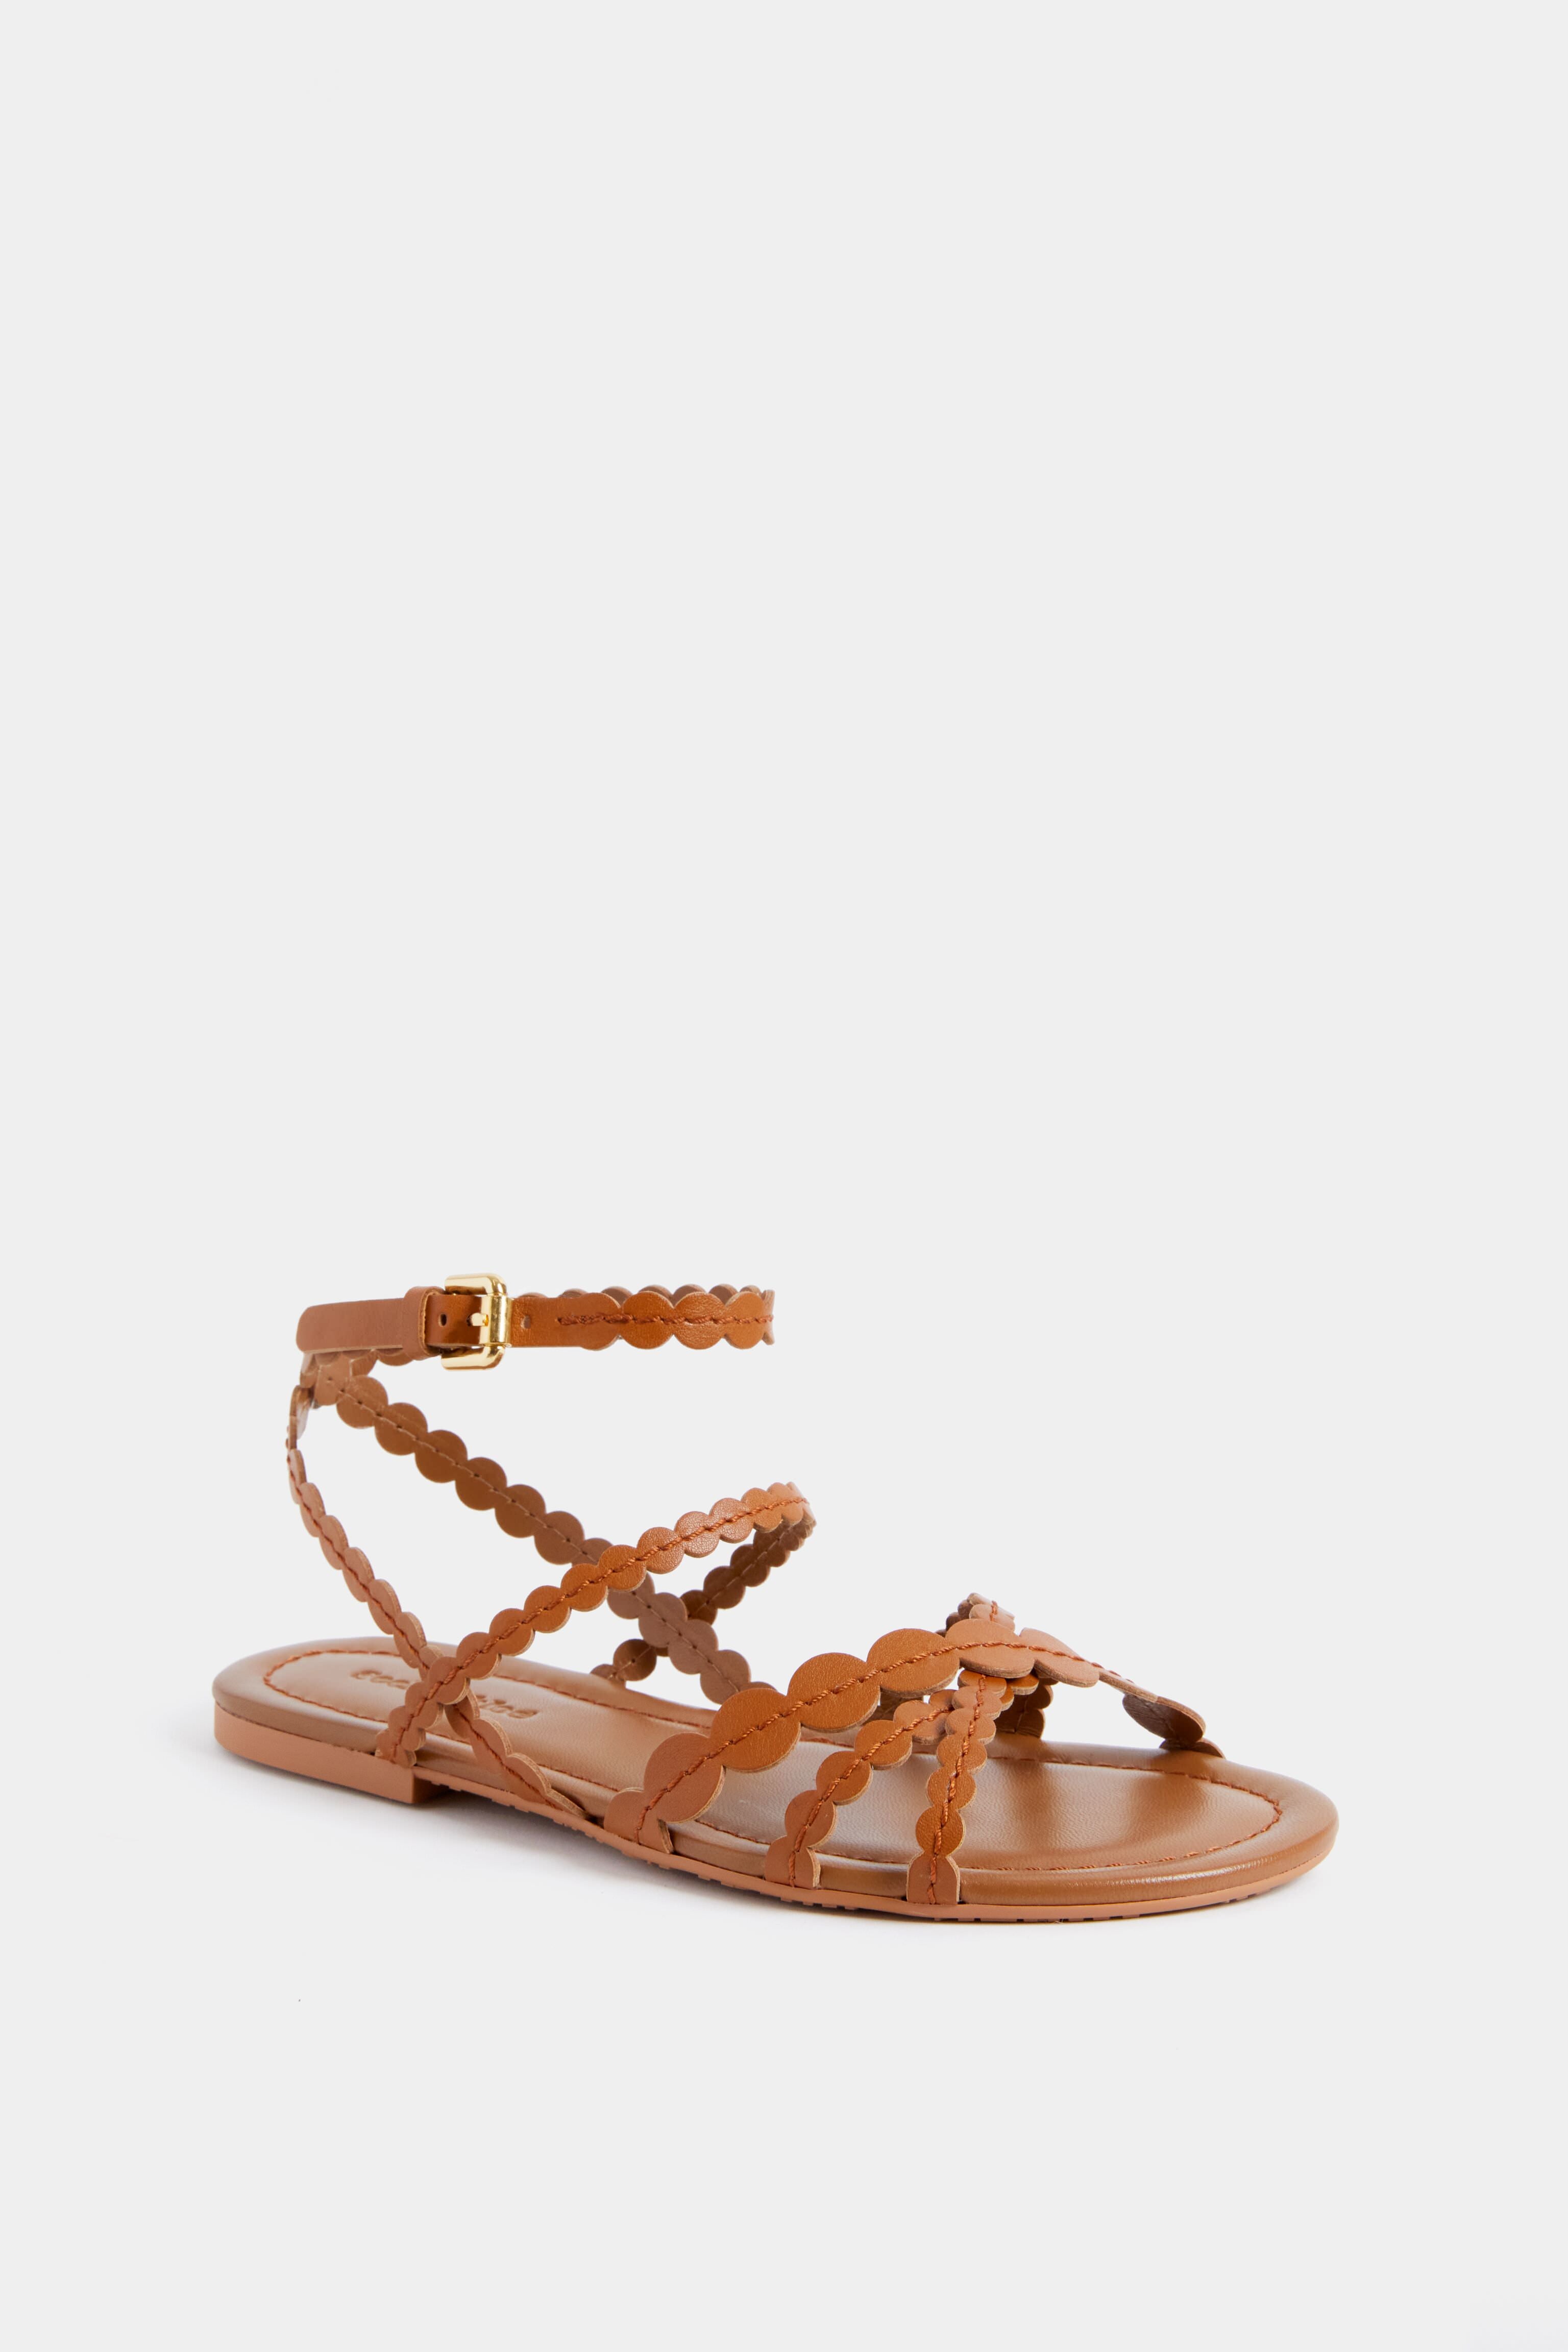 The Best Summer Sandals for Women in 2022